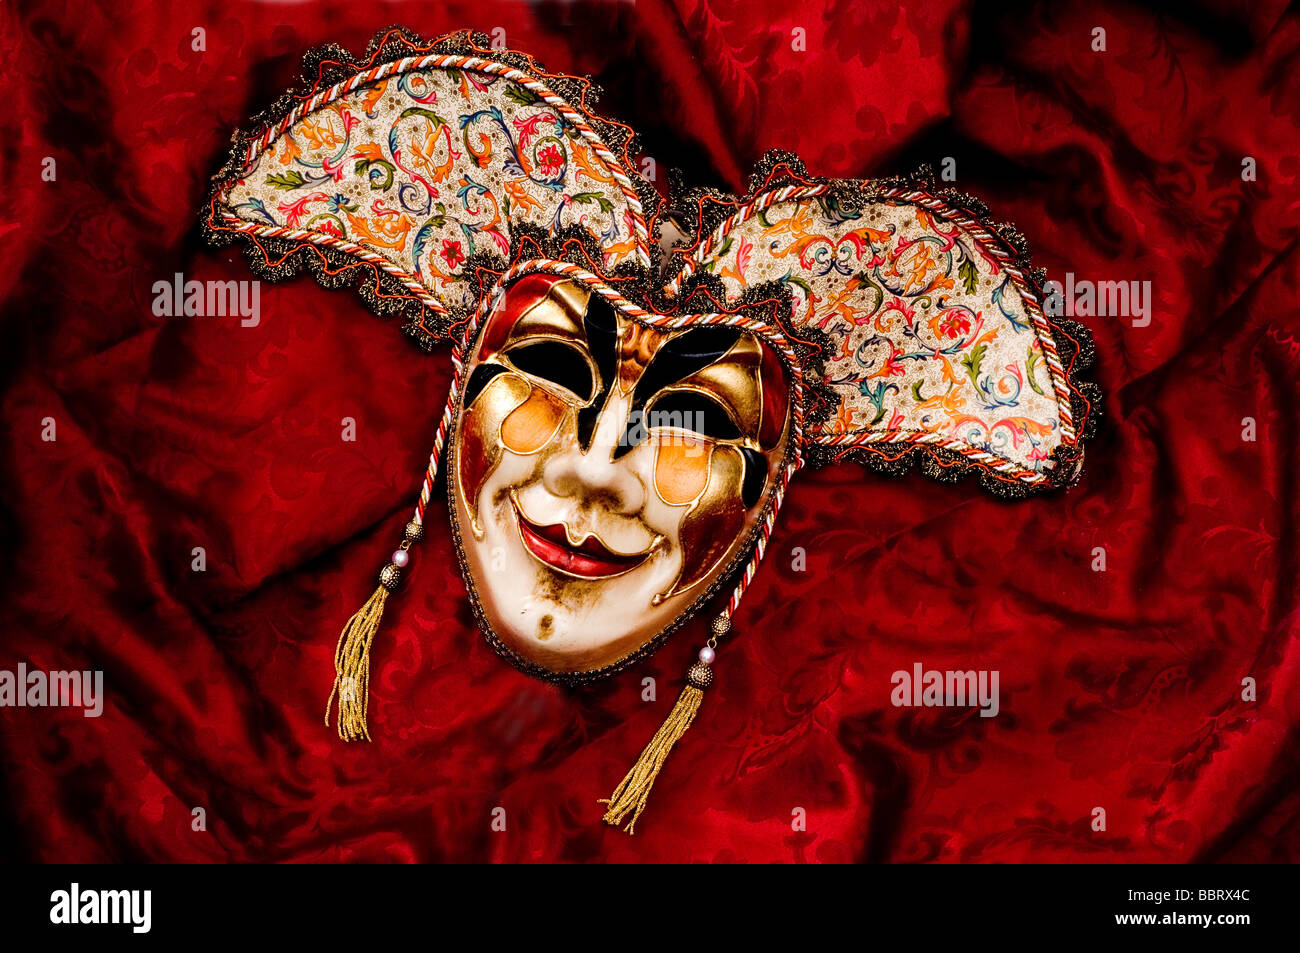 Venetian face mask against a red background Stock Photo